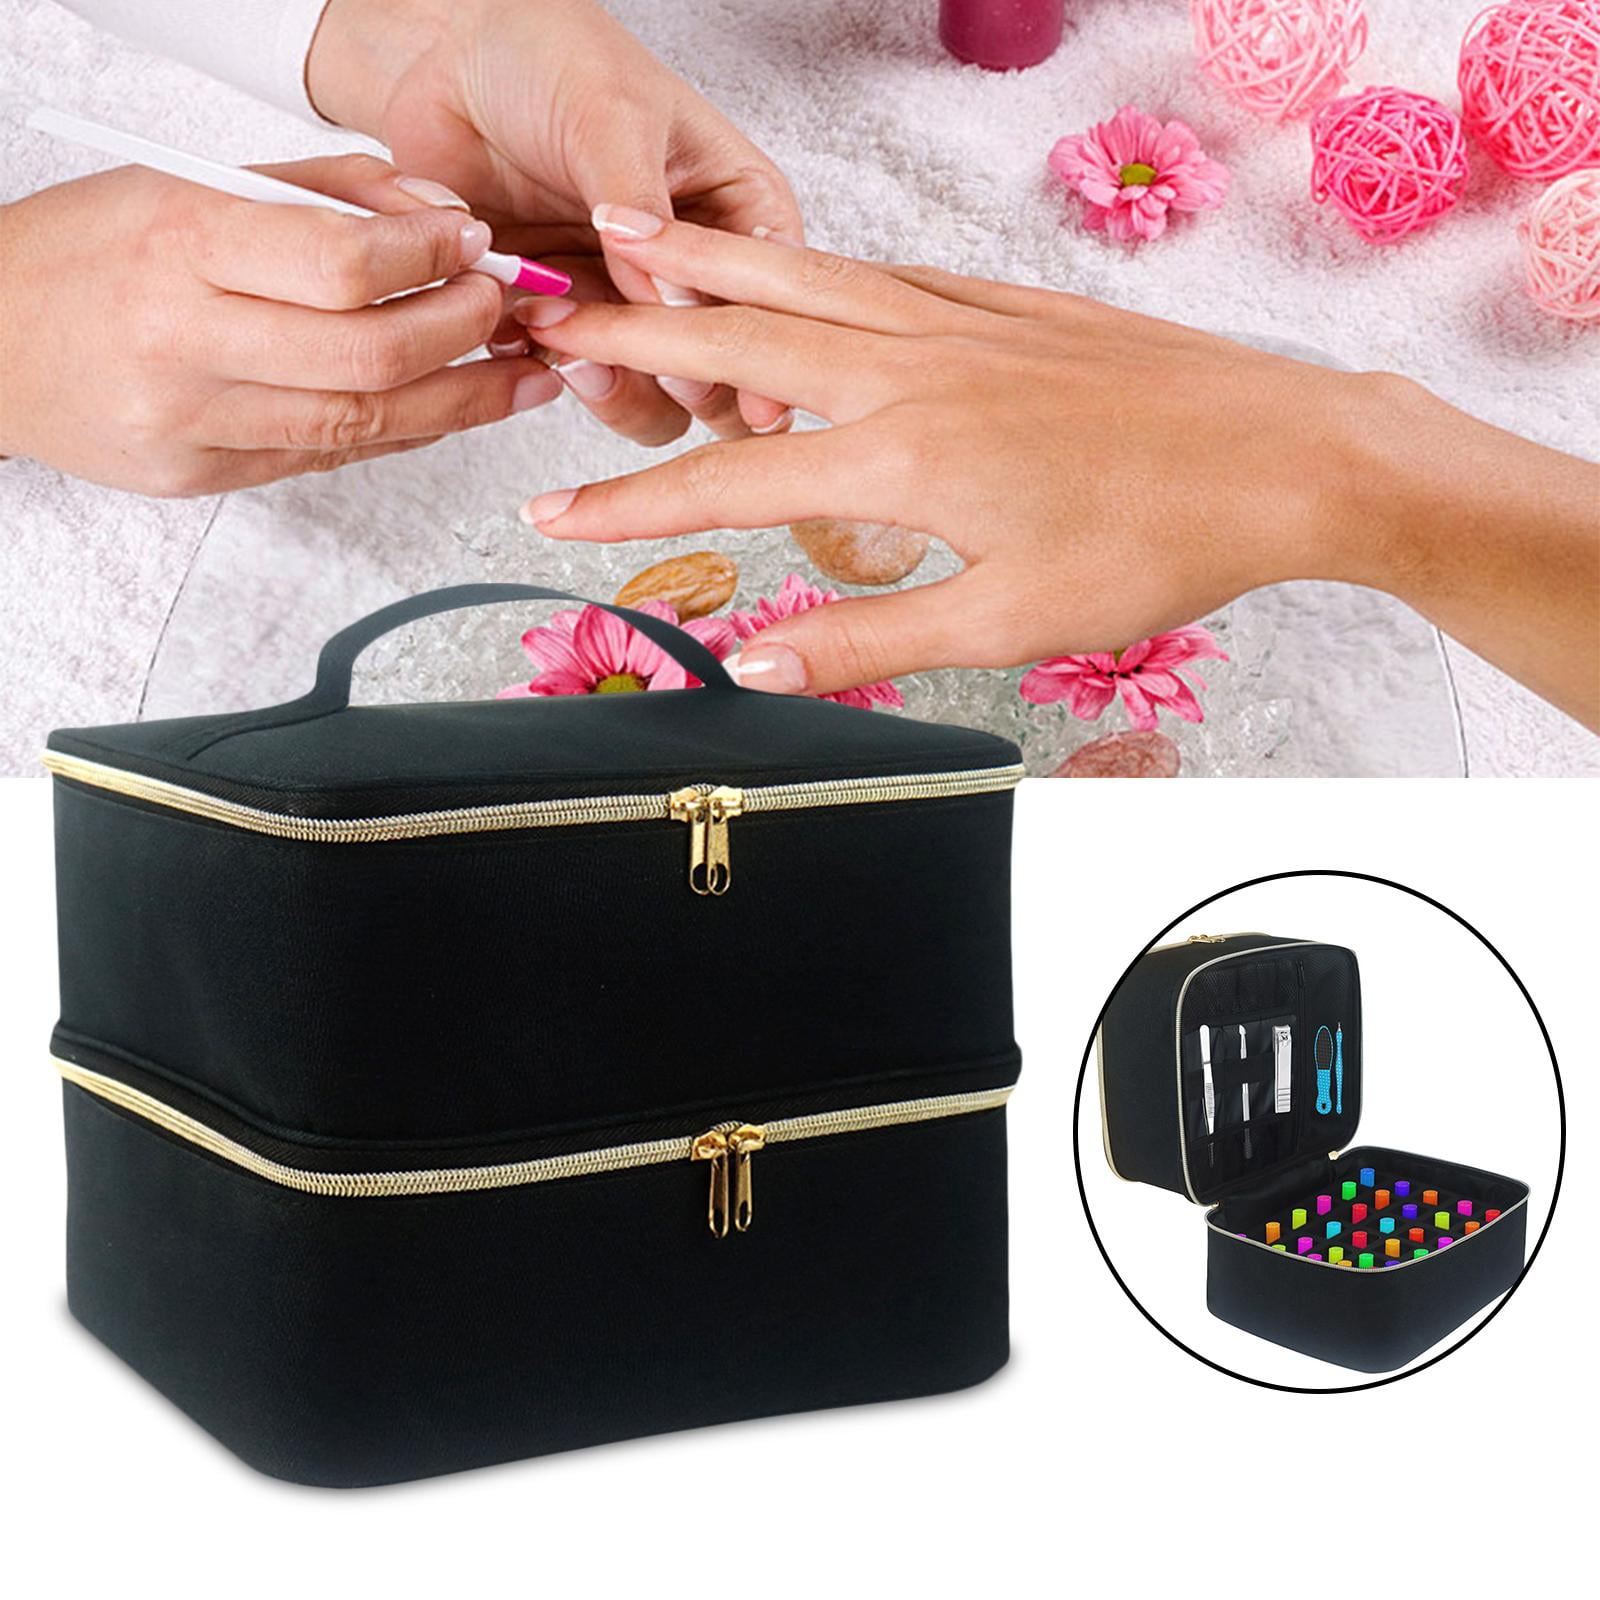  Covkev Double-Layer Nail Polish Organizer Storage Nail Dryer  and 30 Bottles [0.5 fl.oz], Portable Nail Polish Bag Organizer Case, Nail  Polish Carrying Case with Manicure Tools Storage—Leopard : Beauty 